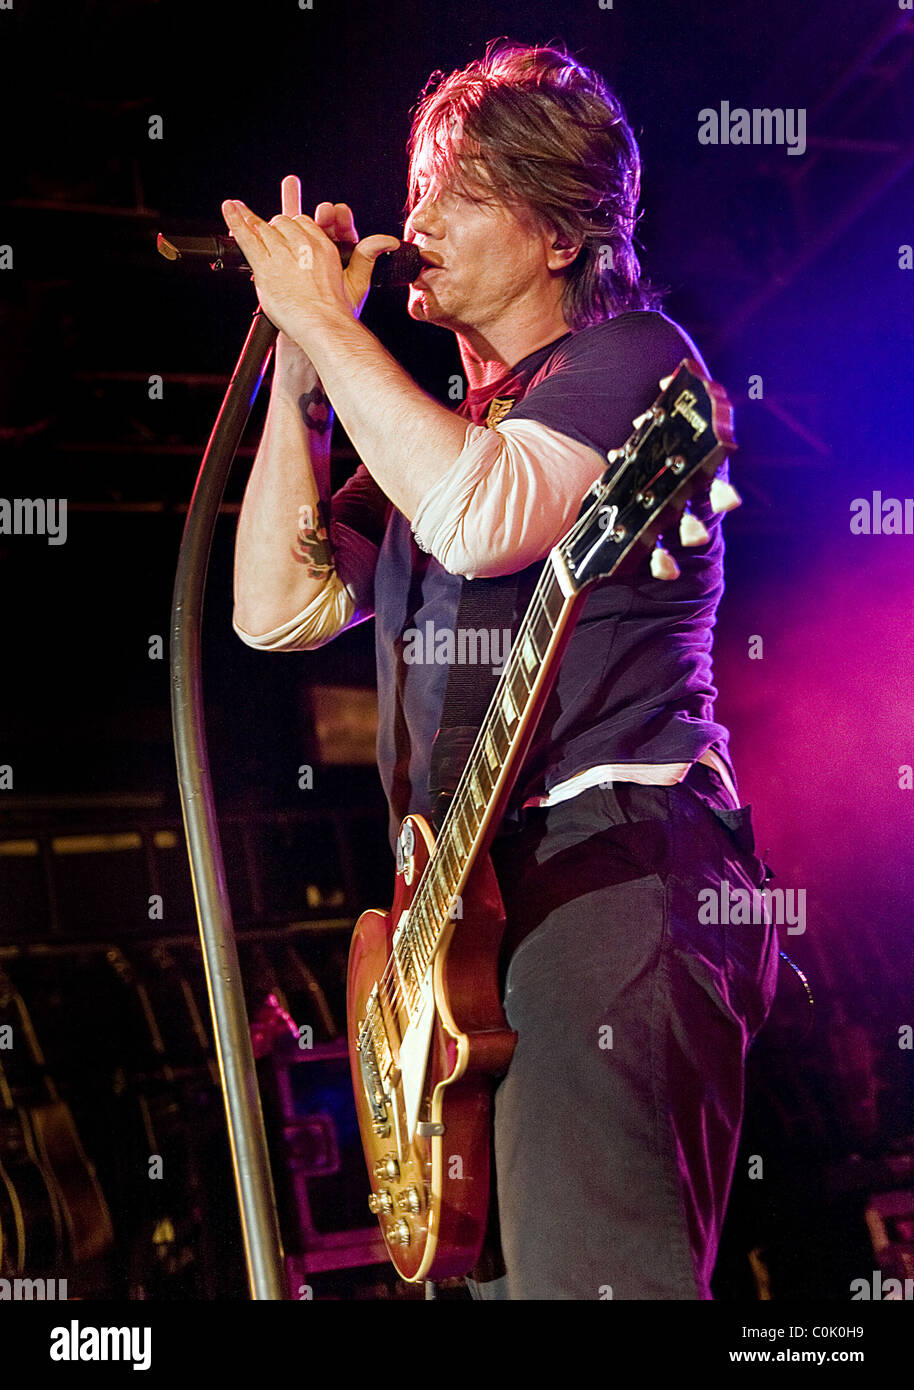 John Rzeznik of The Goo Goo Dolls performing at Liverpool Carling Academy  as part of their UK tour Liverpool, England Stock Photo - Alamy